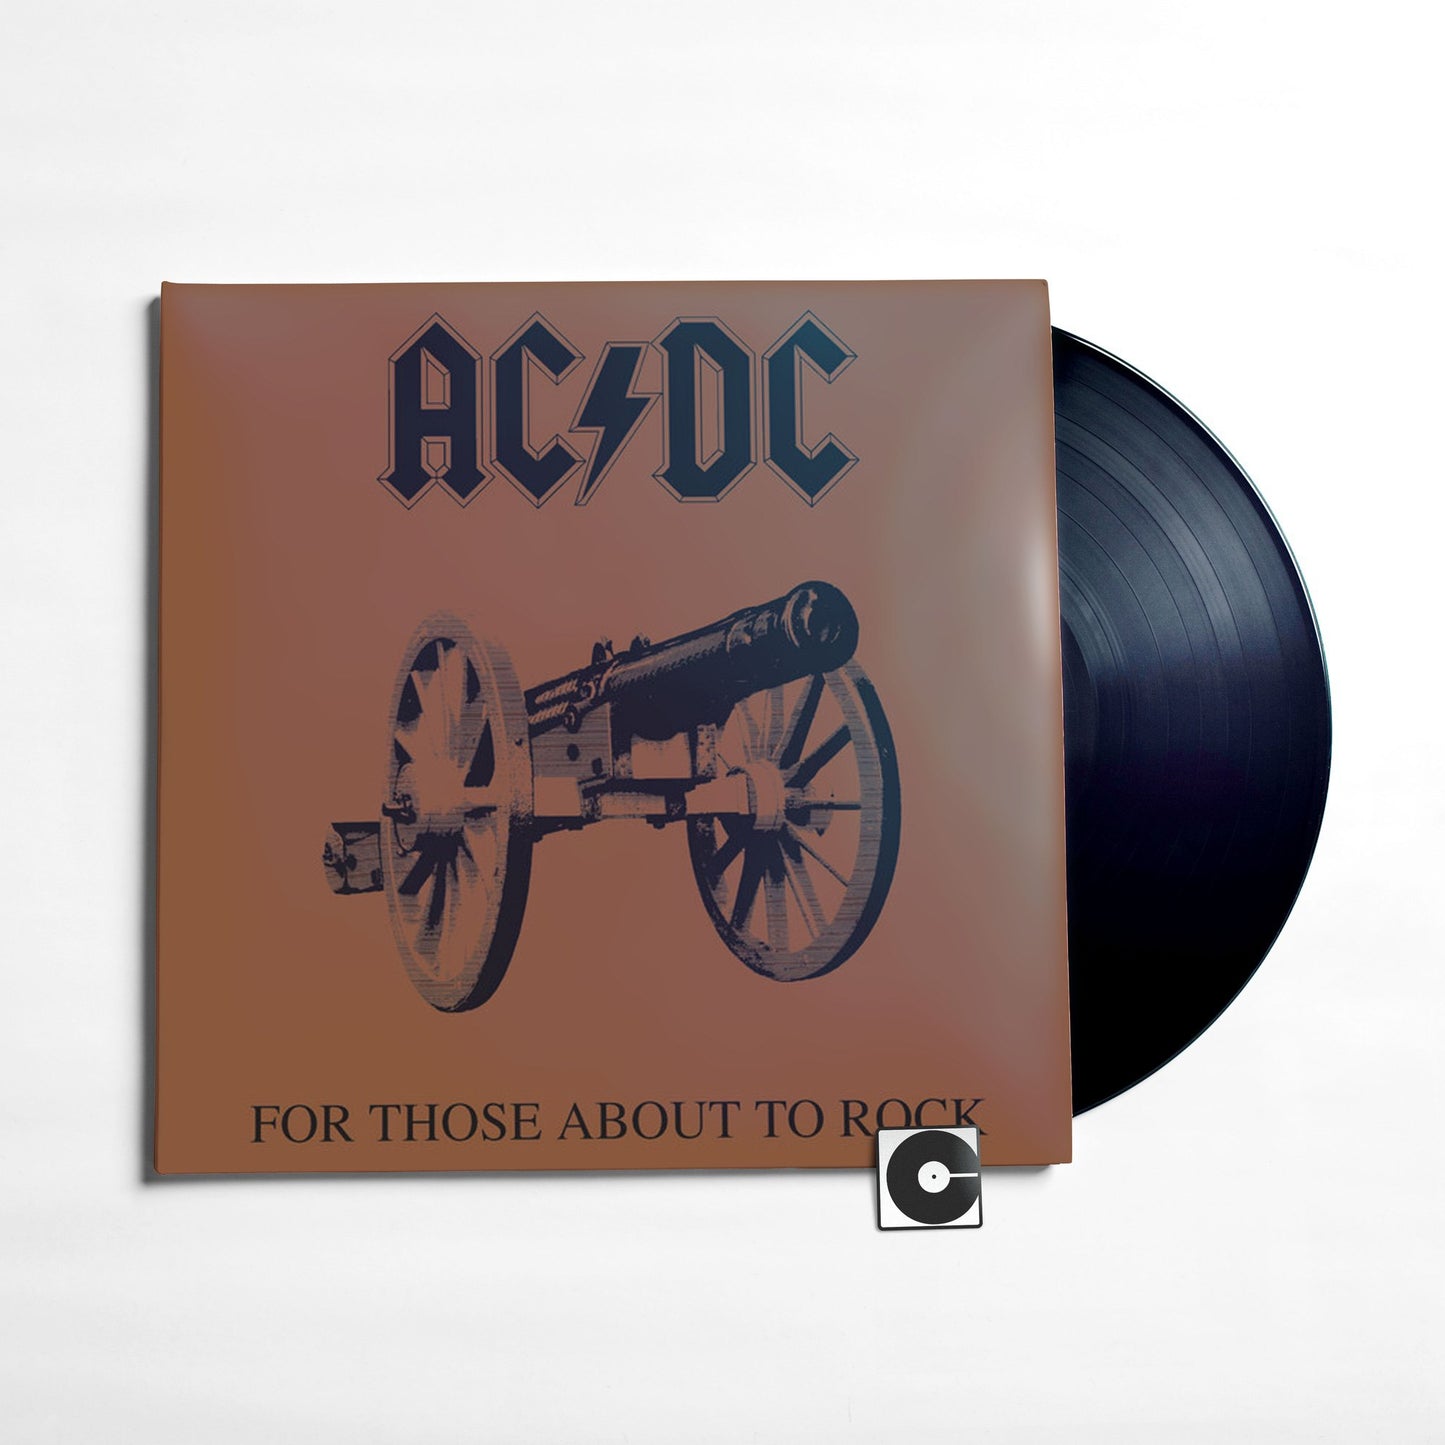 AC/DC - "For Those About To Rock We Salute You"